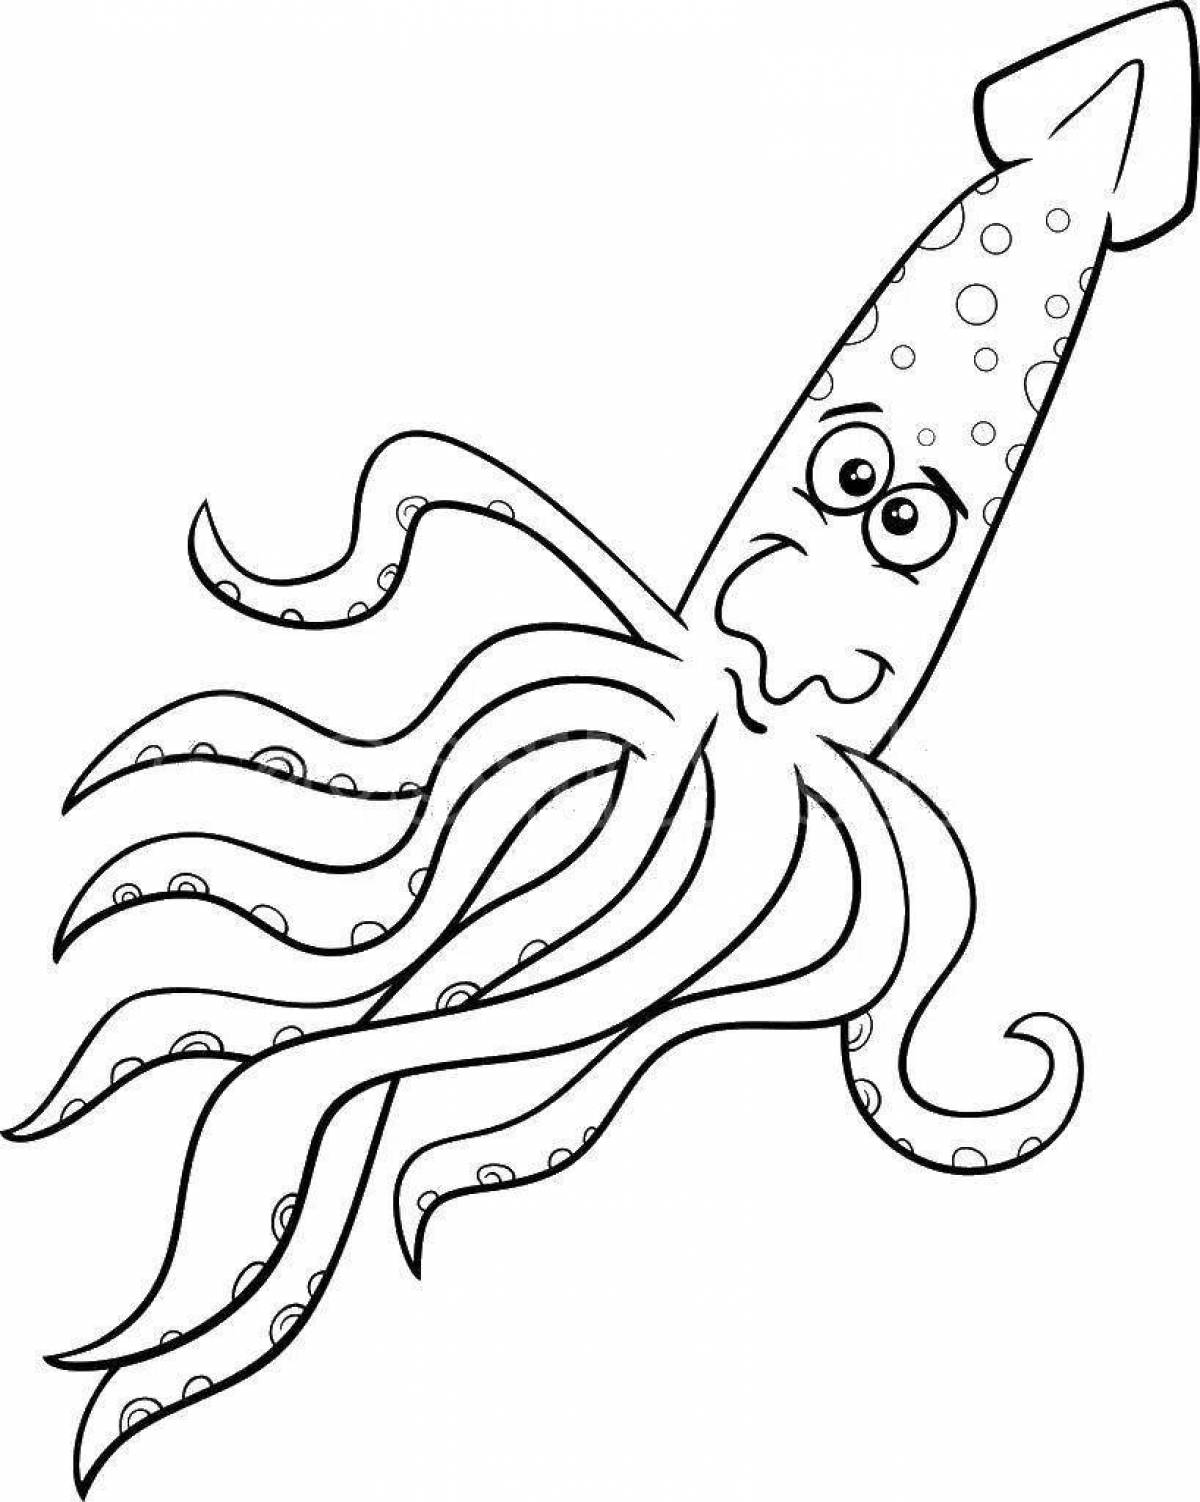 Fun squid coloring game for kids